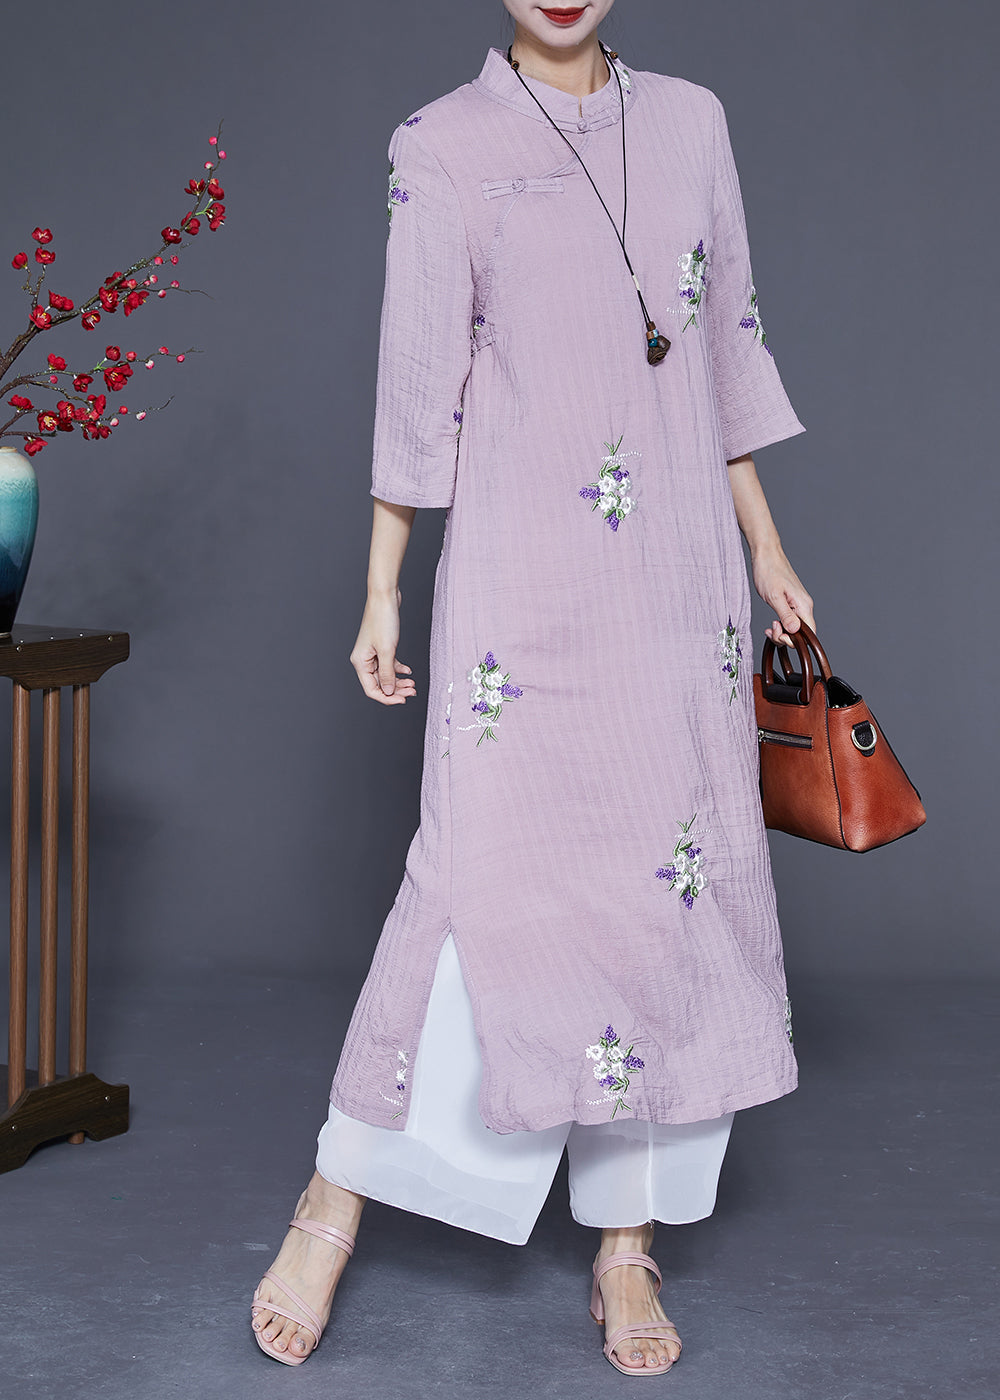 peopleterritory Vintage Purple Embroideried Chinese Button Linen Long Dresses Bracelet Sleeve LY1845